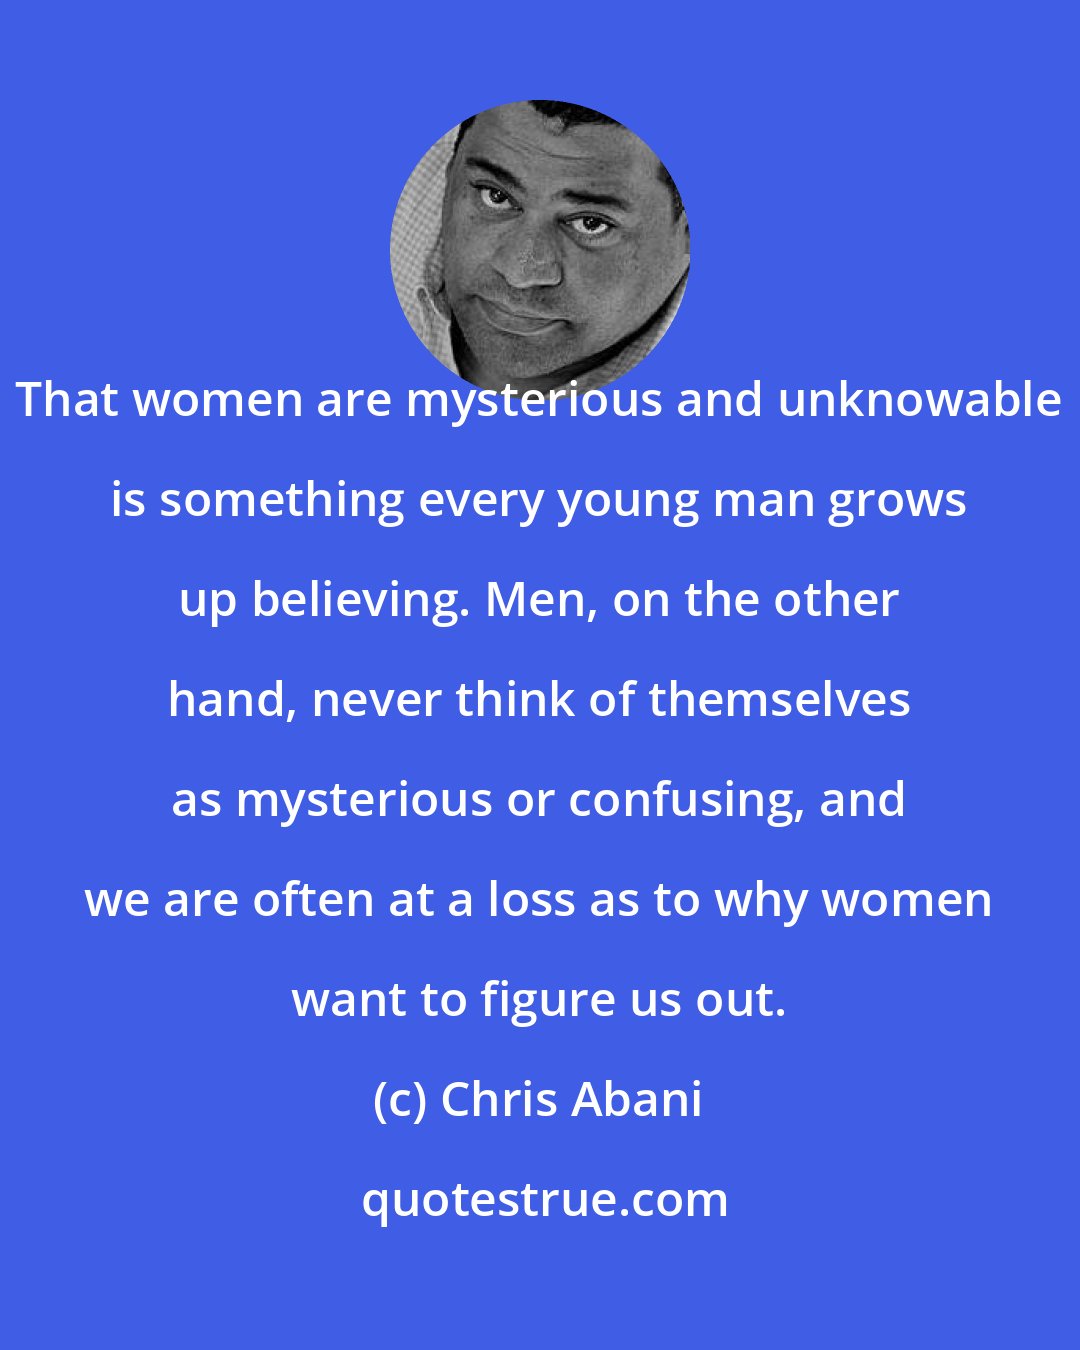 Chris Abani: That women are mysterious and unknowable is something every young man grows up believing. Men, on the other hand, never think of themselves as mysterious or confusing, and we are often at a loss as to why women want to figure us out.